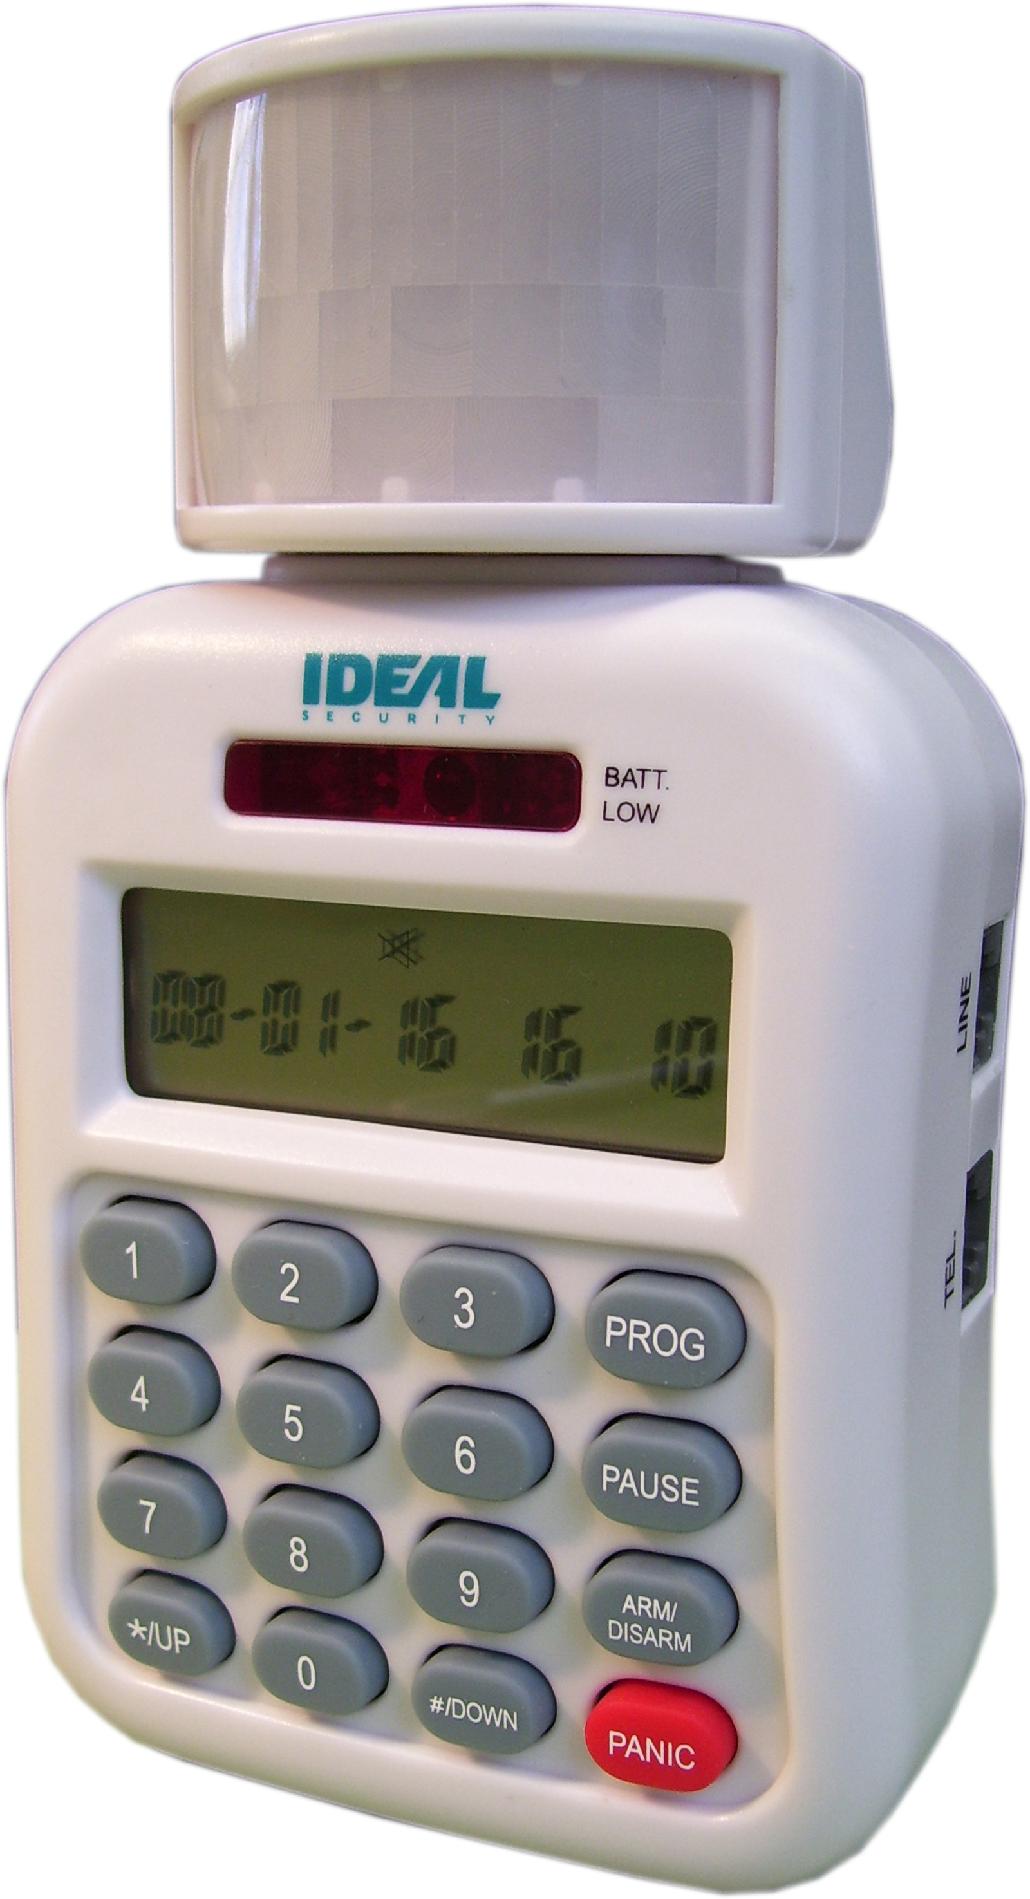 Ideal Security Inc. Alarm with Telephone Response